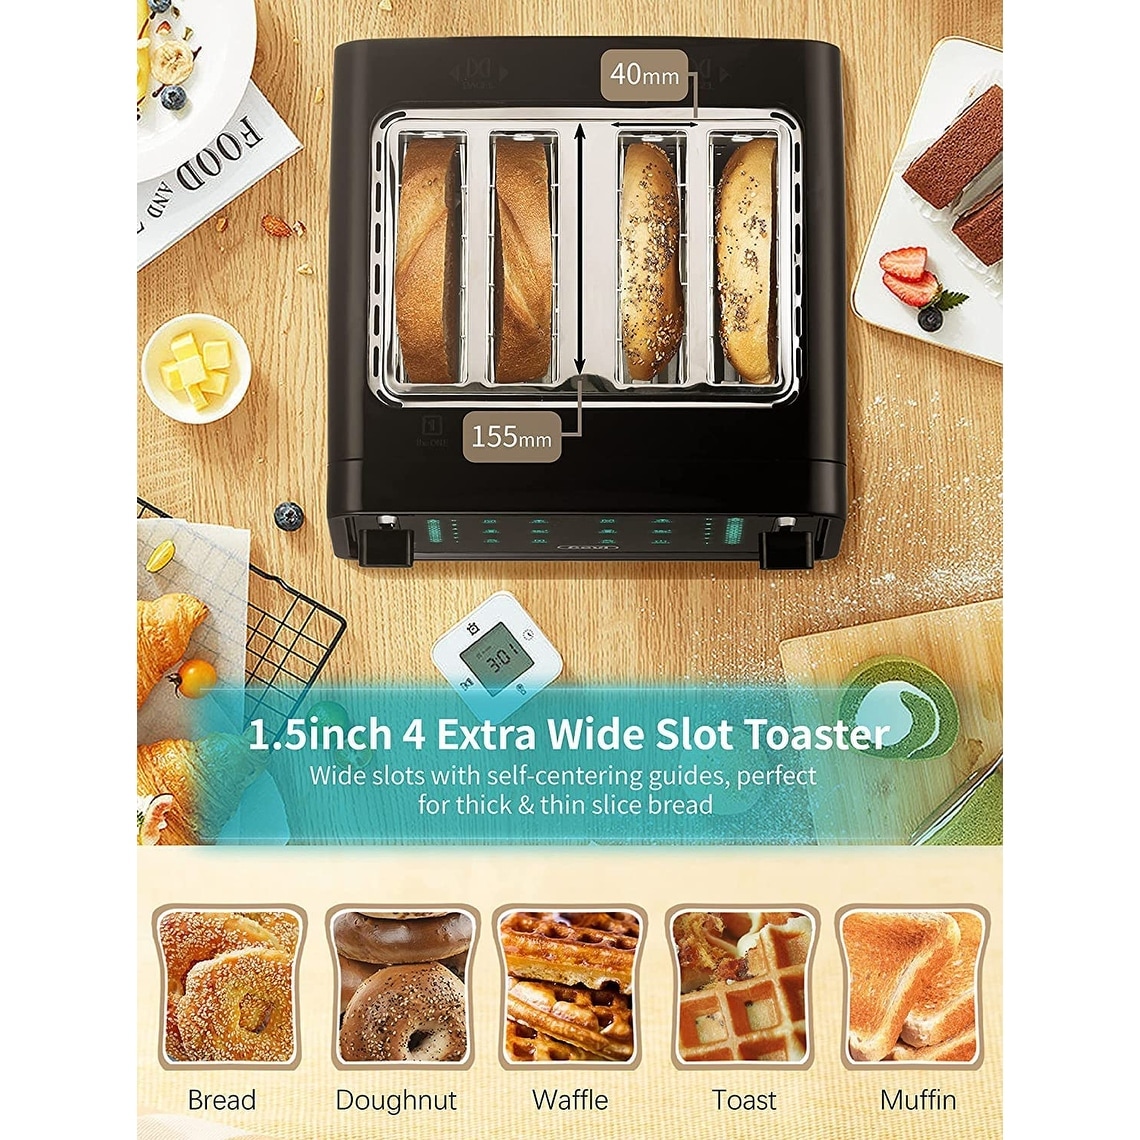  Gevi Toaster 4 Slice,Led Display Touchscreen Bagel Toaster with  Dual Control Panels of Bagel/Reheat/Defrost/Cancel/Toasting One Slice/Longer  Function,6 Shade Setting: Home & Kitchen